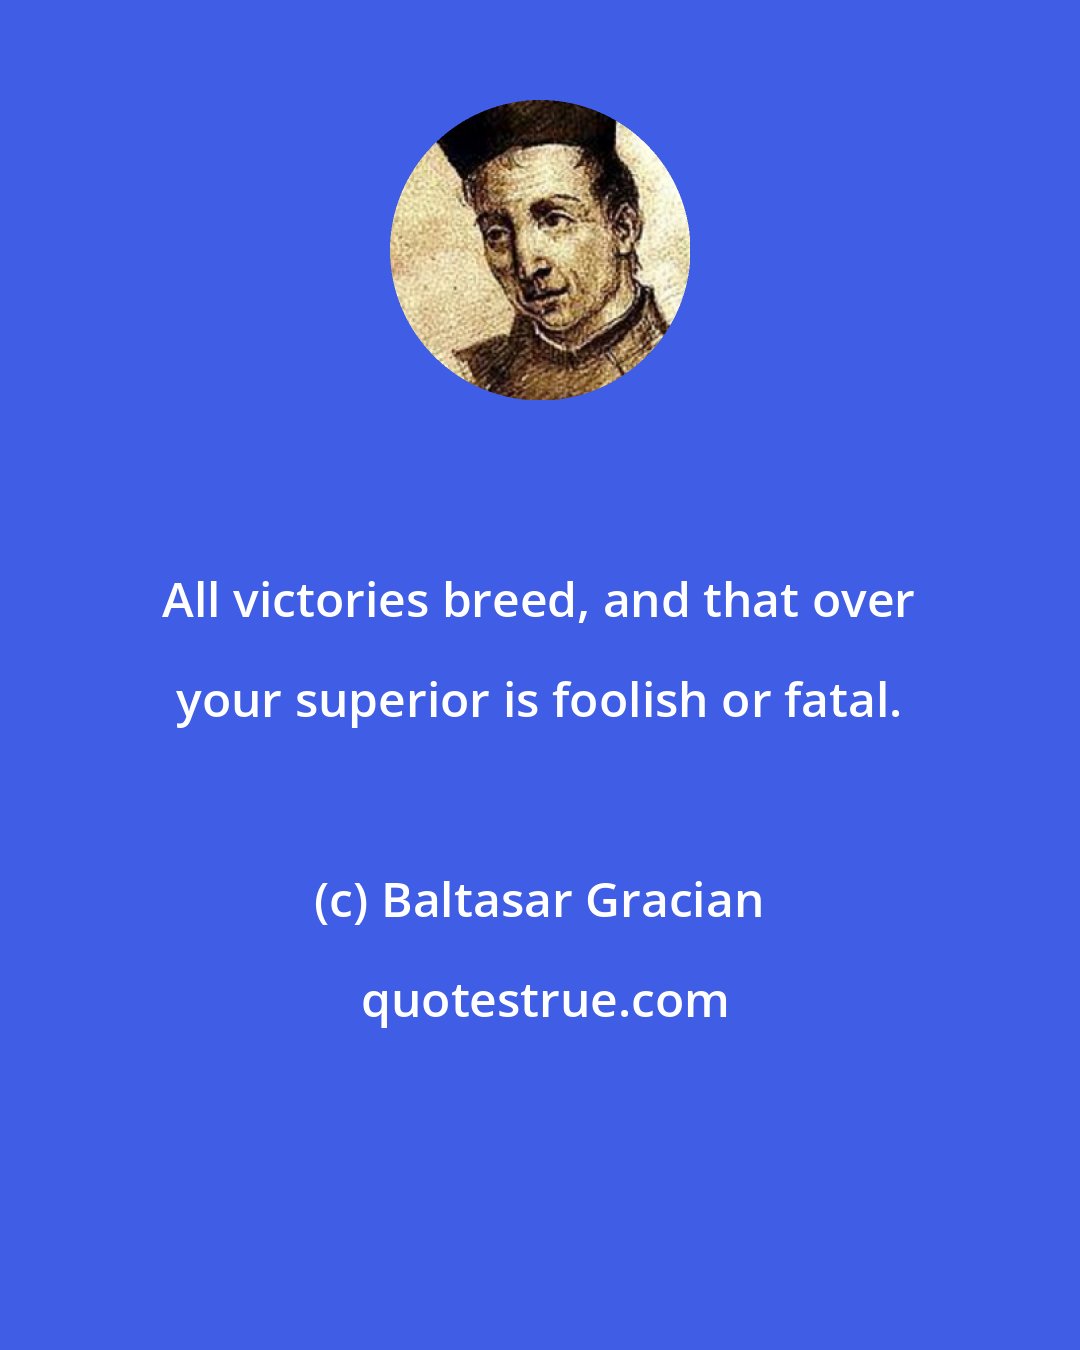 Baltasar Gracian: All victories breed, and that over your superior is foolish or fatal.